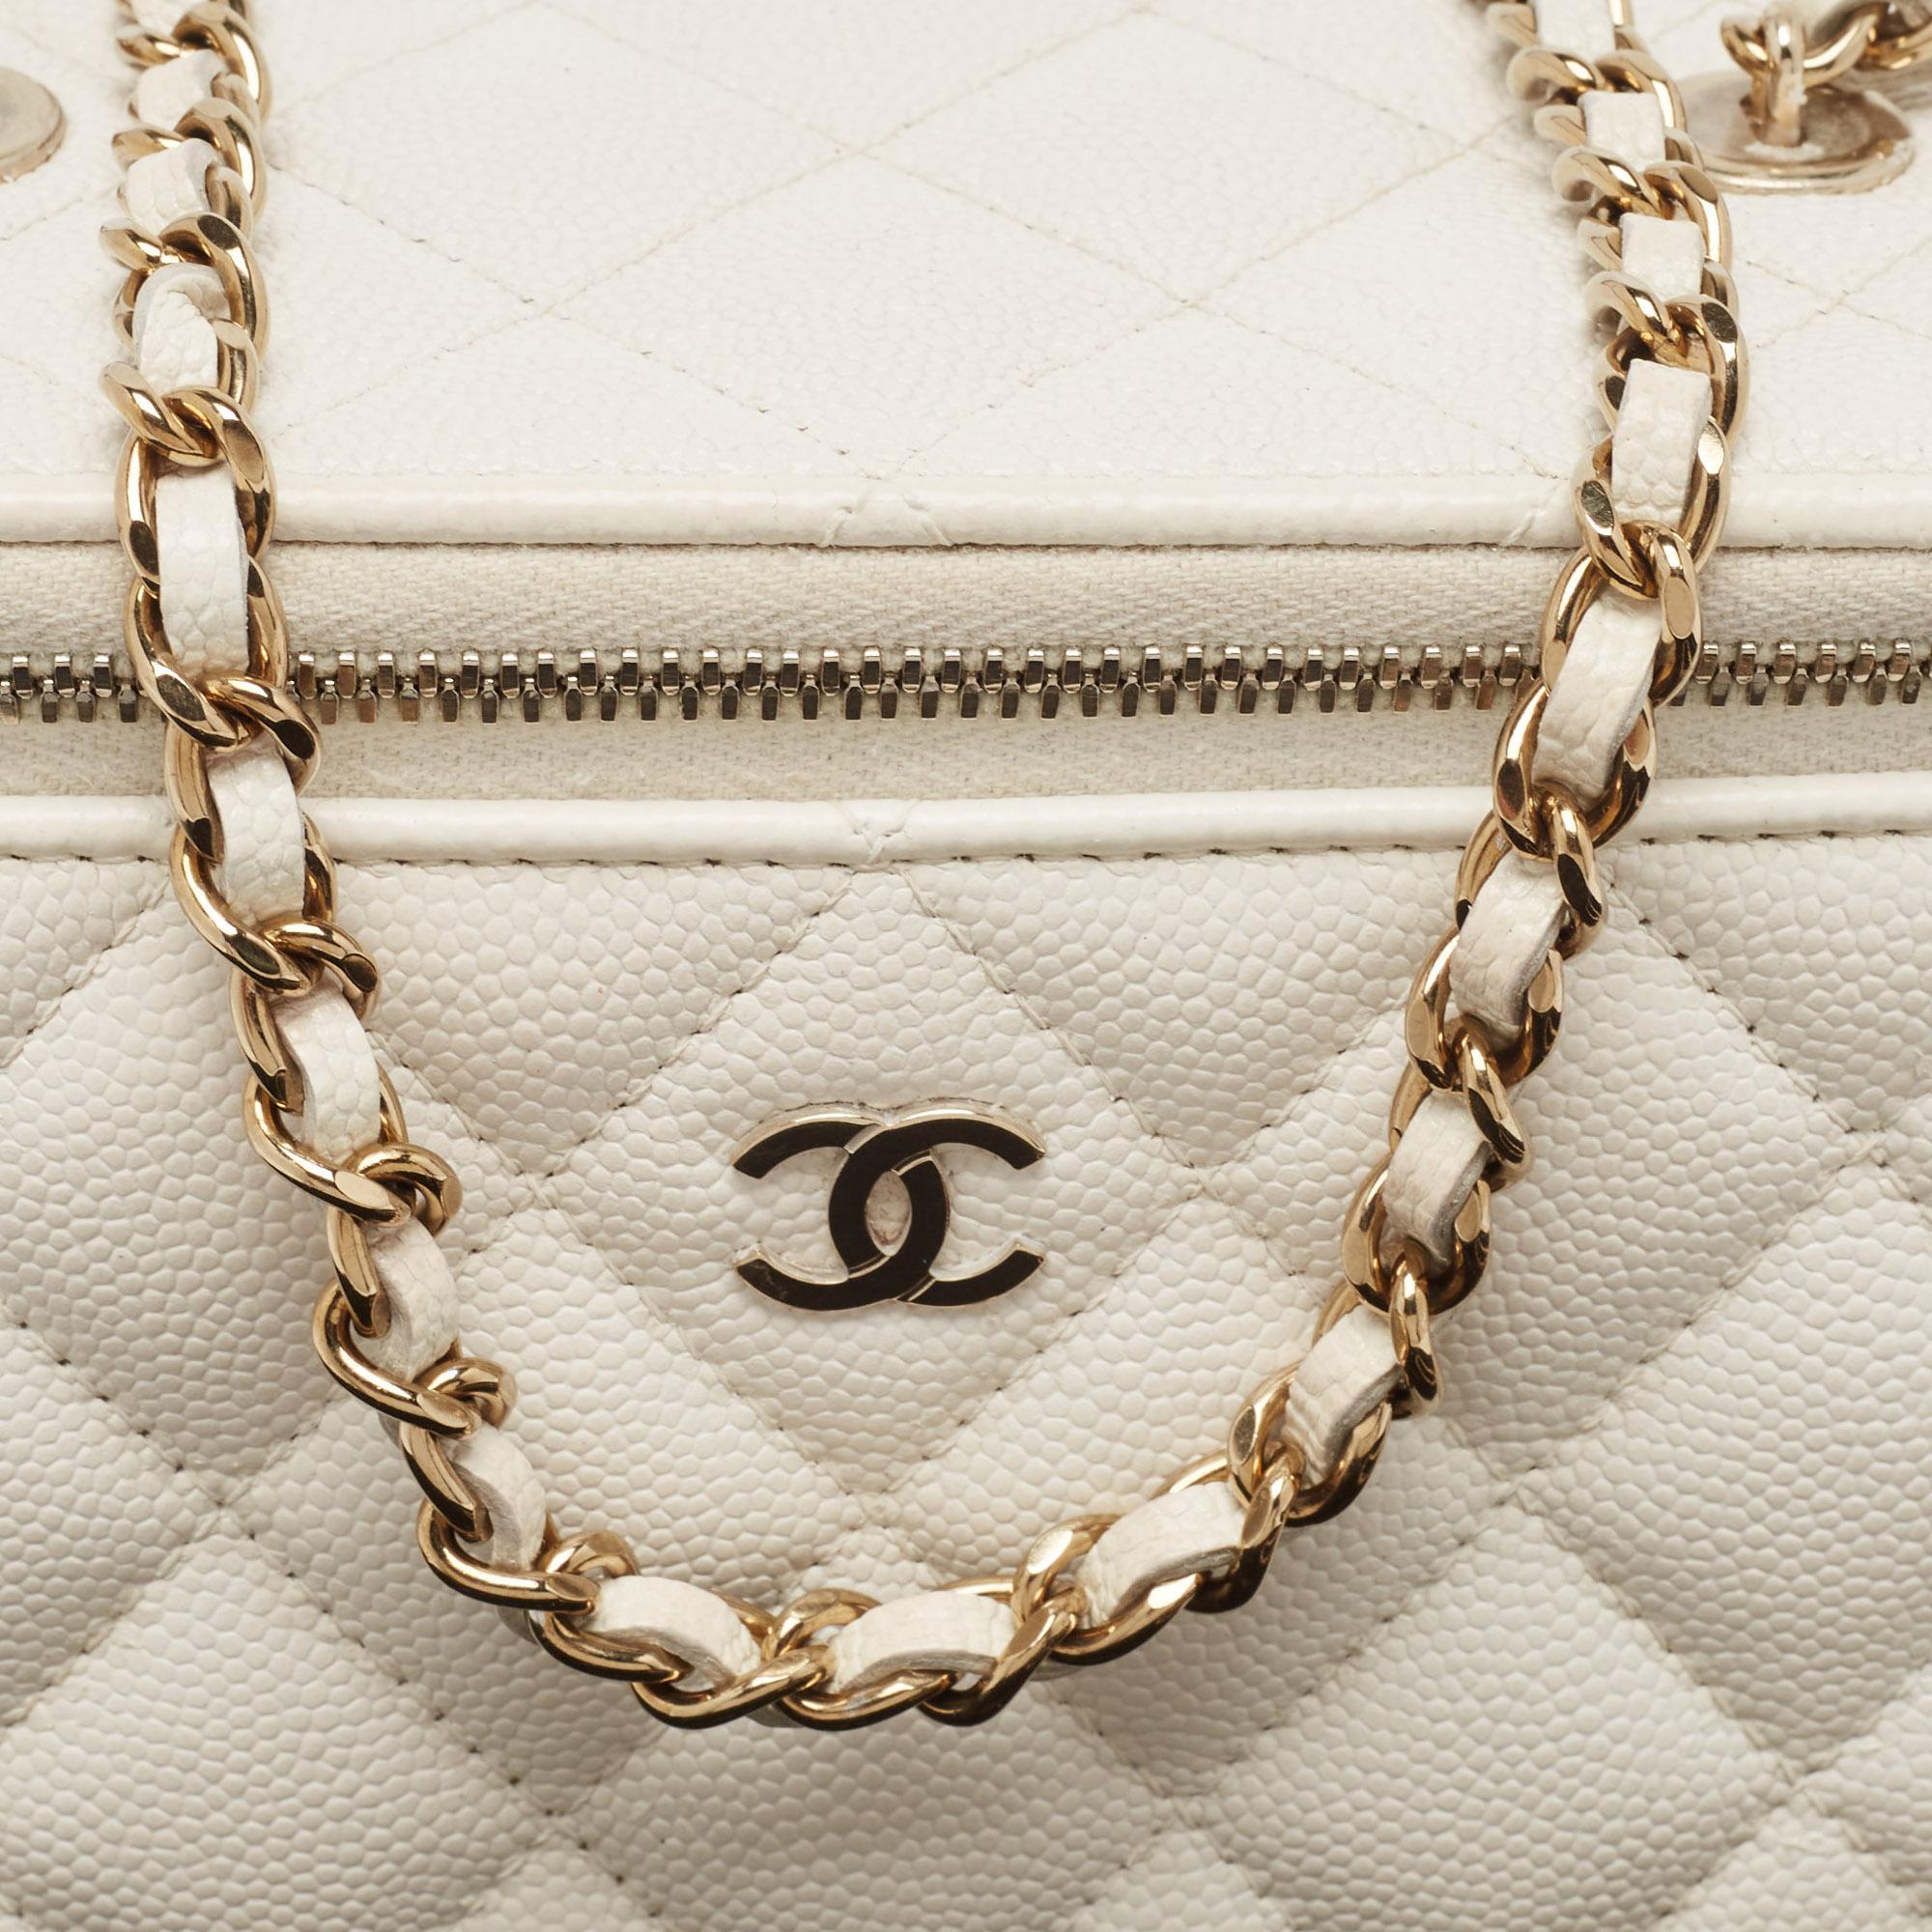 Chanel White Quilted Caviar Leather Small CC Vanity Case Bag 1